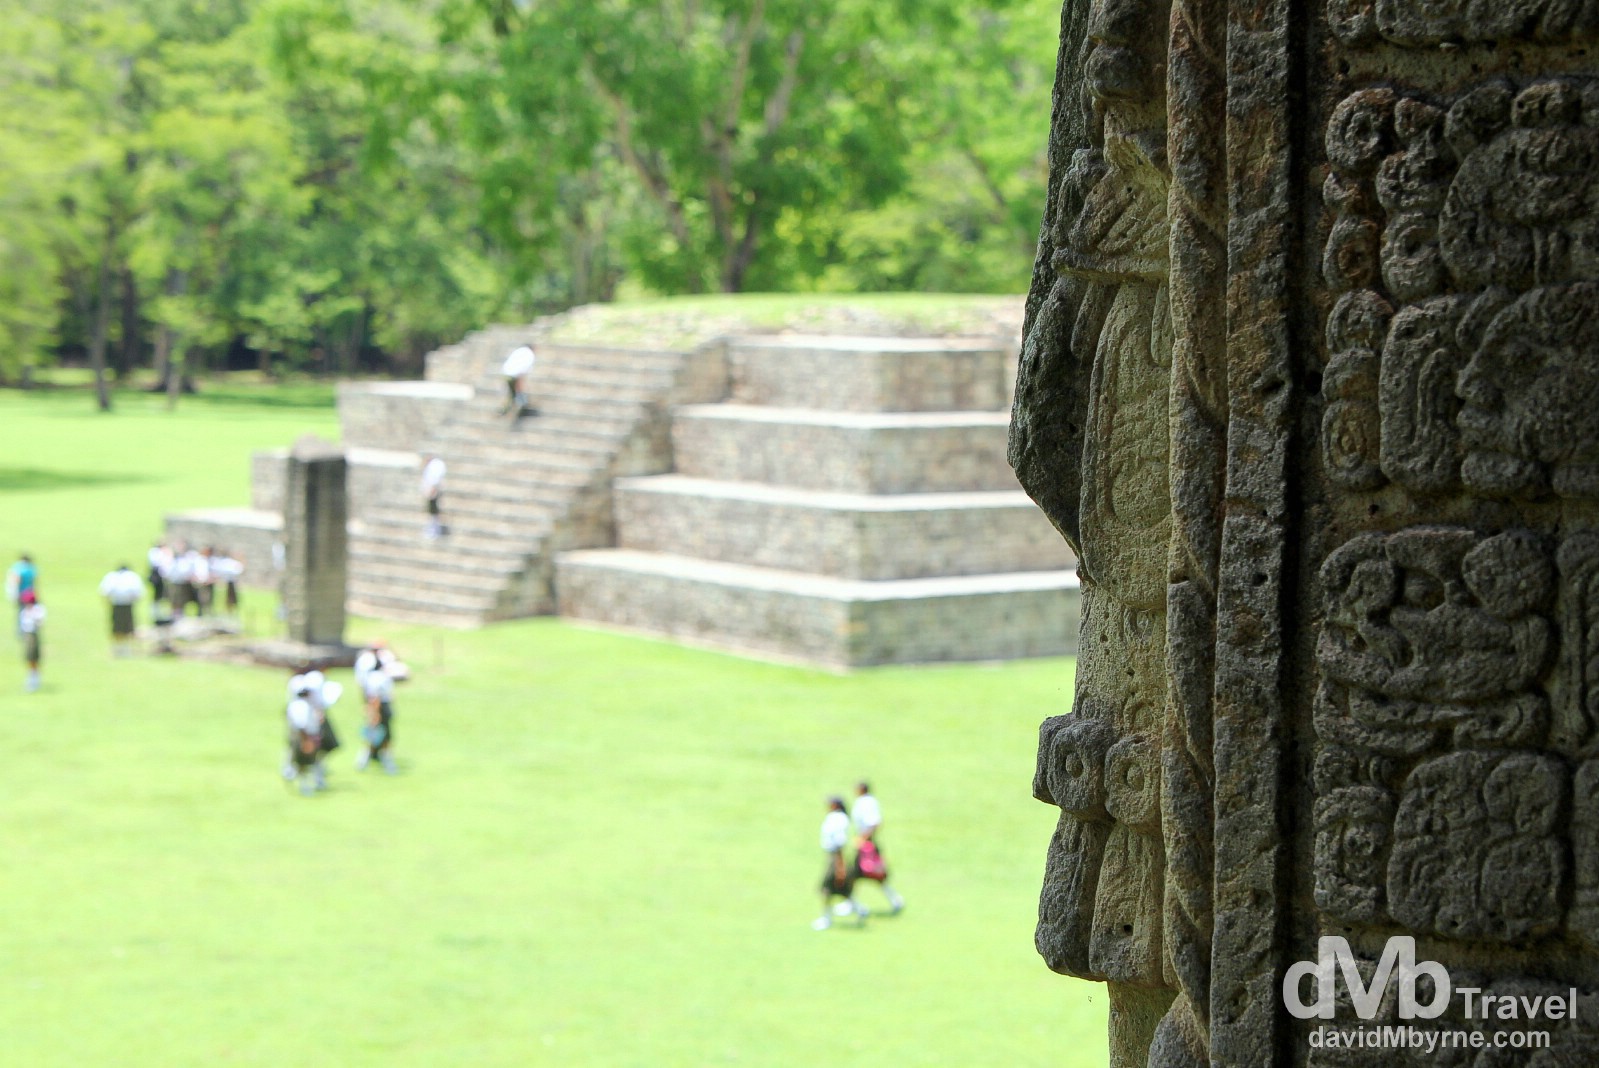 The Great Plaza of the Copan Architectural Site, western Honduras. June 7th 2013.